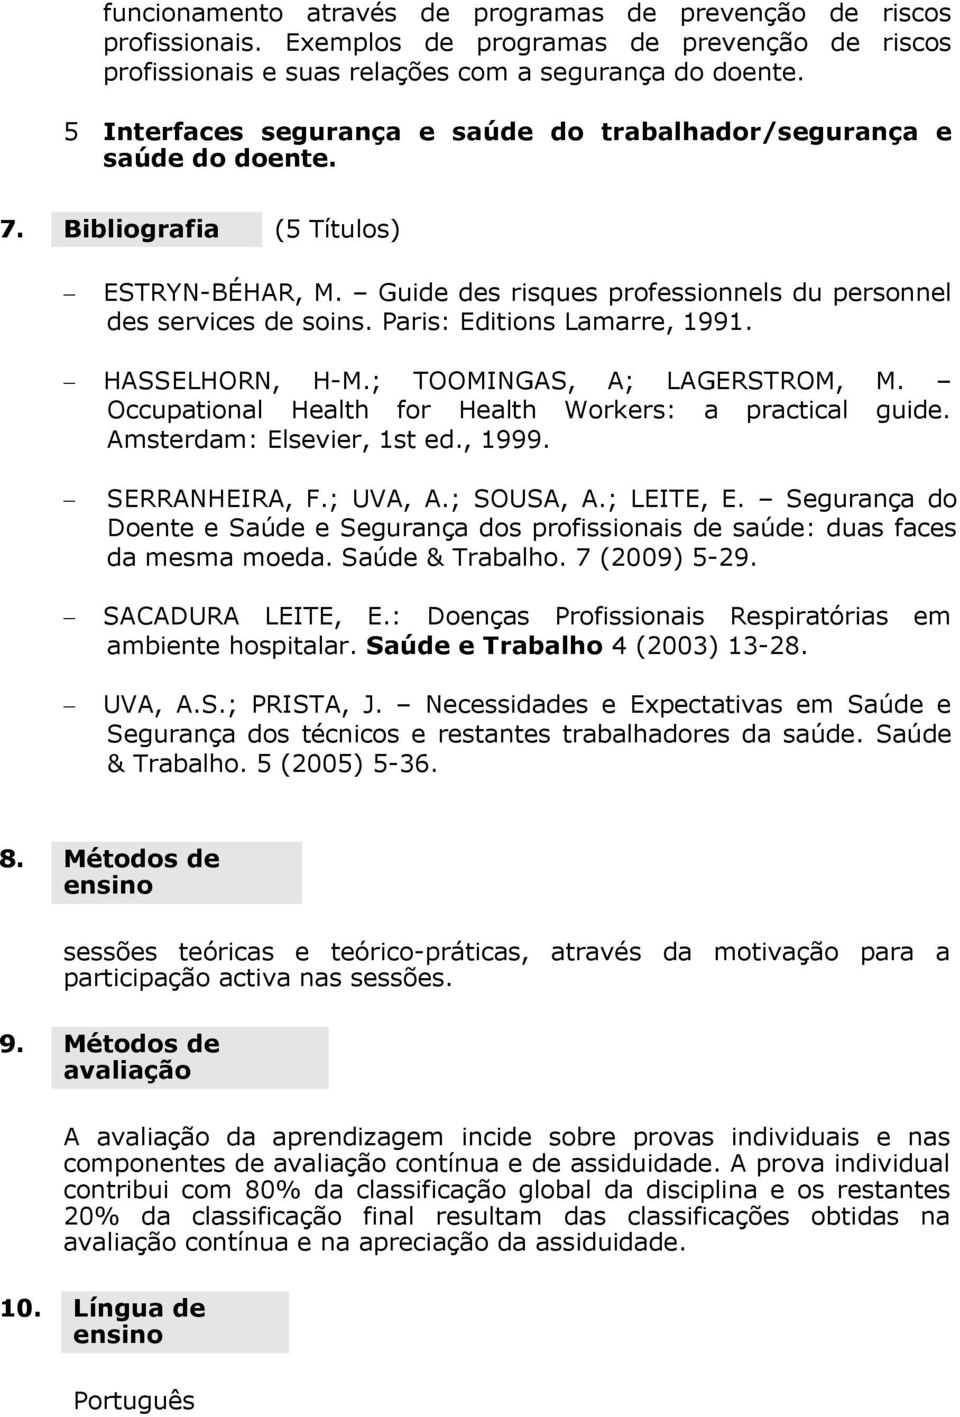 Paris: Editions Lamarre, 1991. HASSELHORN, H-M.; TOOMINGAS, A; LAGERSTROM, M. Occupational Health for Health Workers: a practical guide. Amsterdam: Elsevier, 1st ed., 1999. SERRANHEIRA, F.; UVA, A.